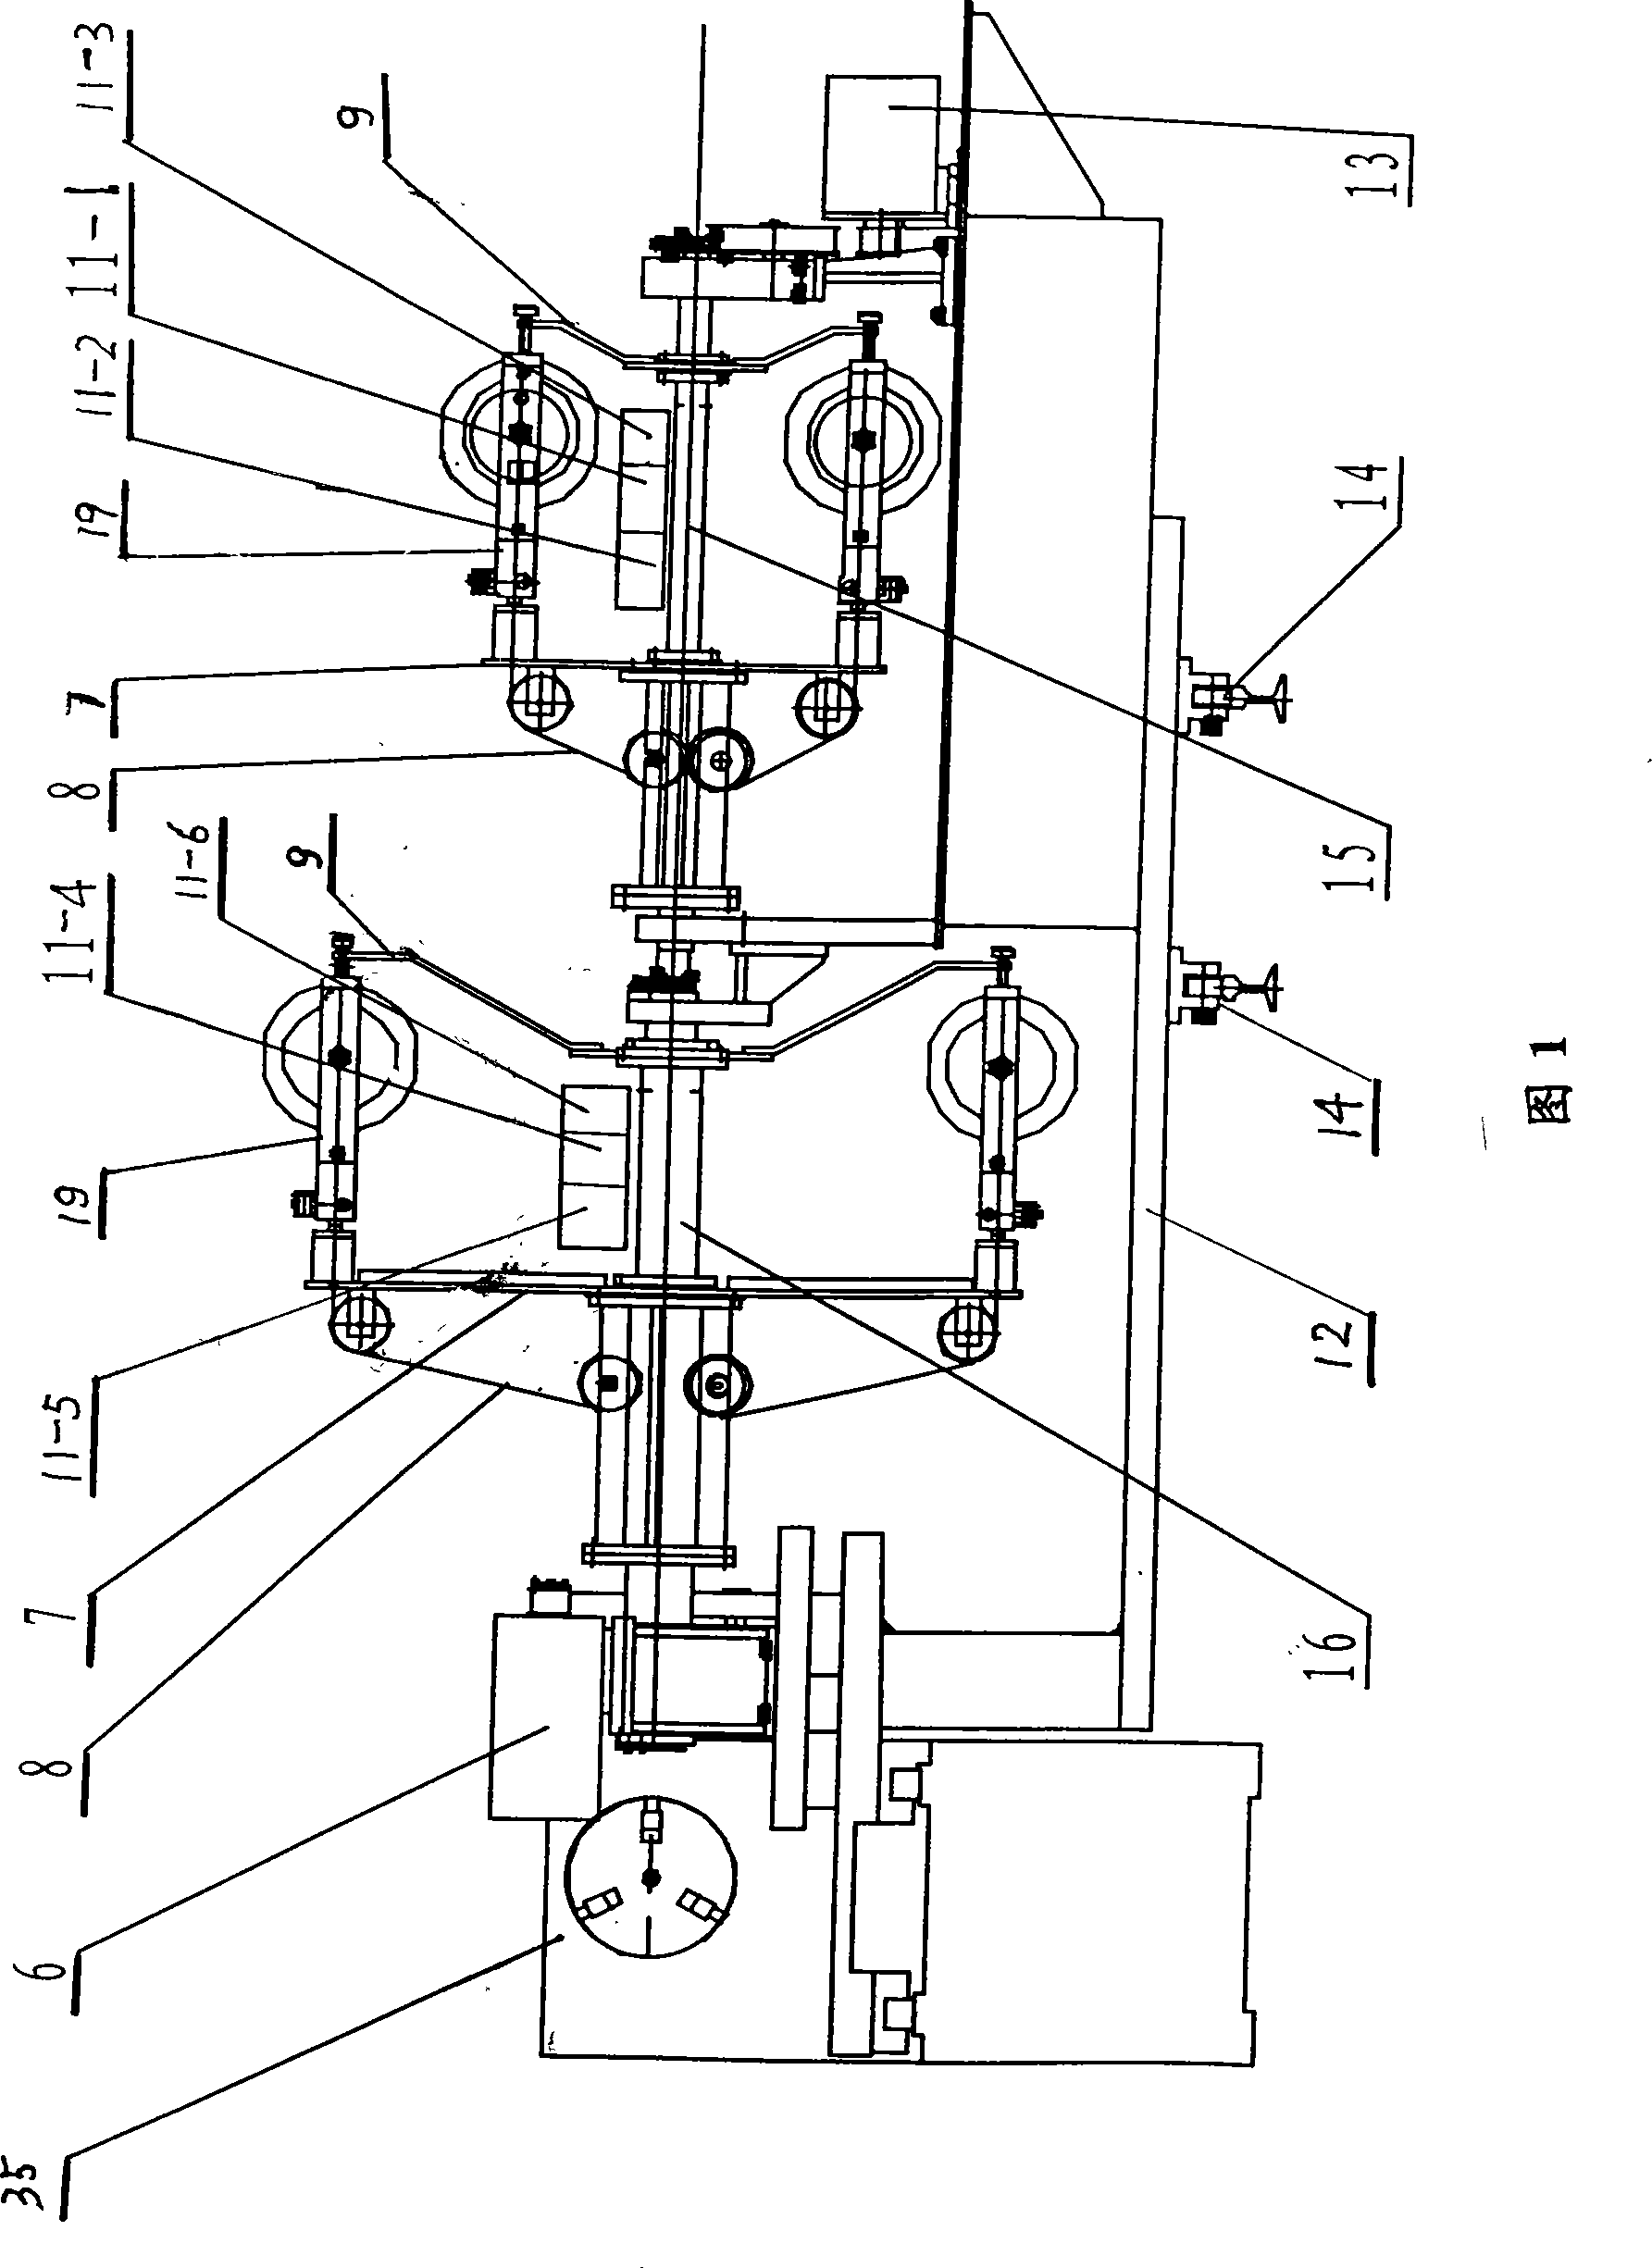 Steel wire tension control method and device for winding multi-strand helical spring